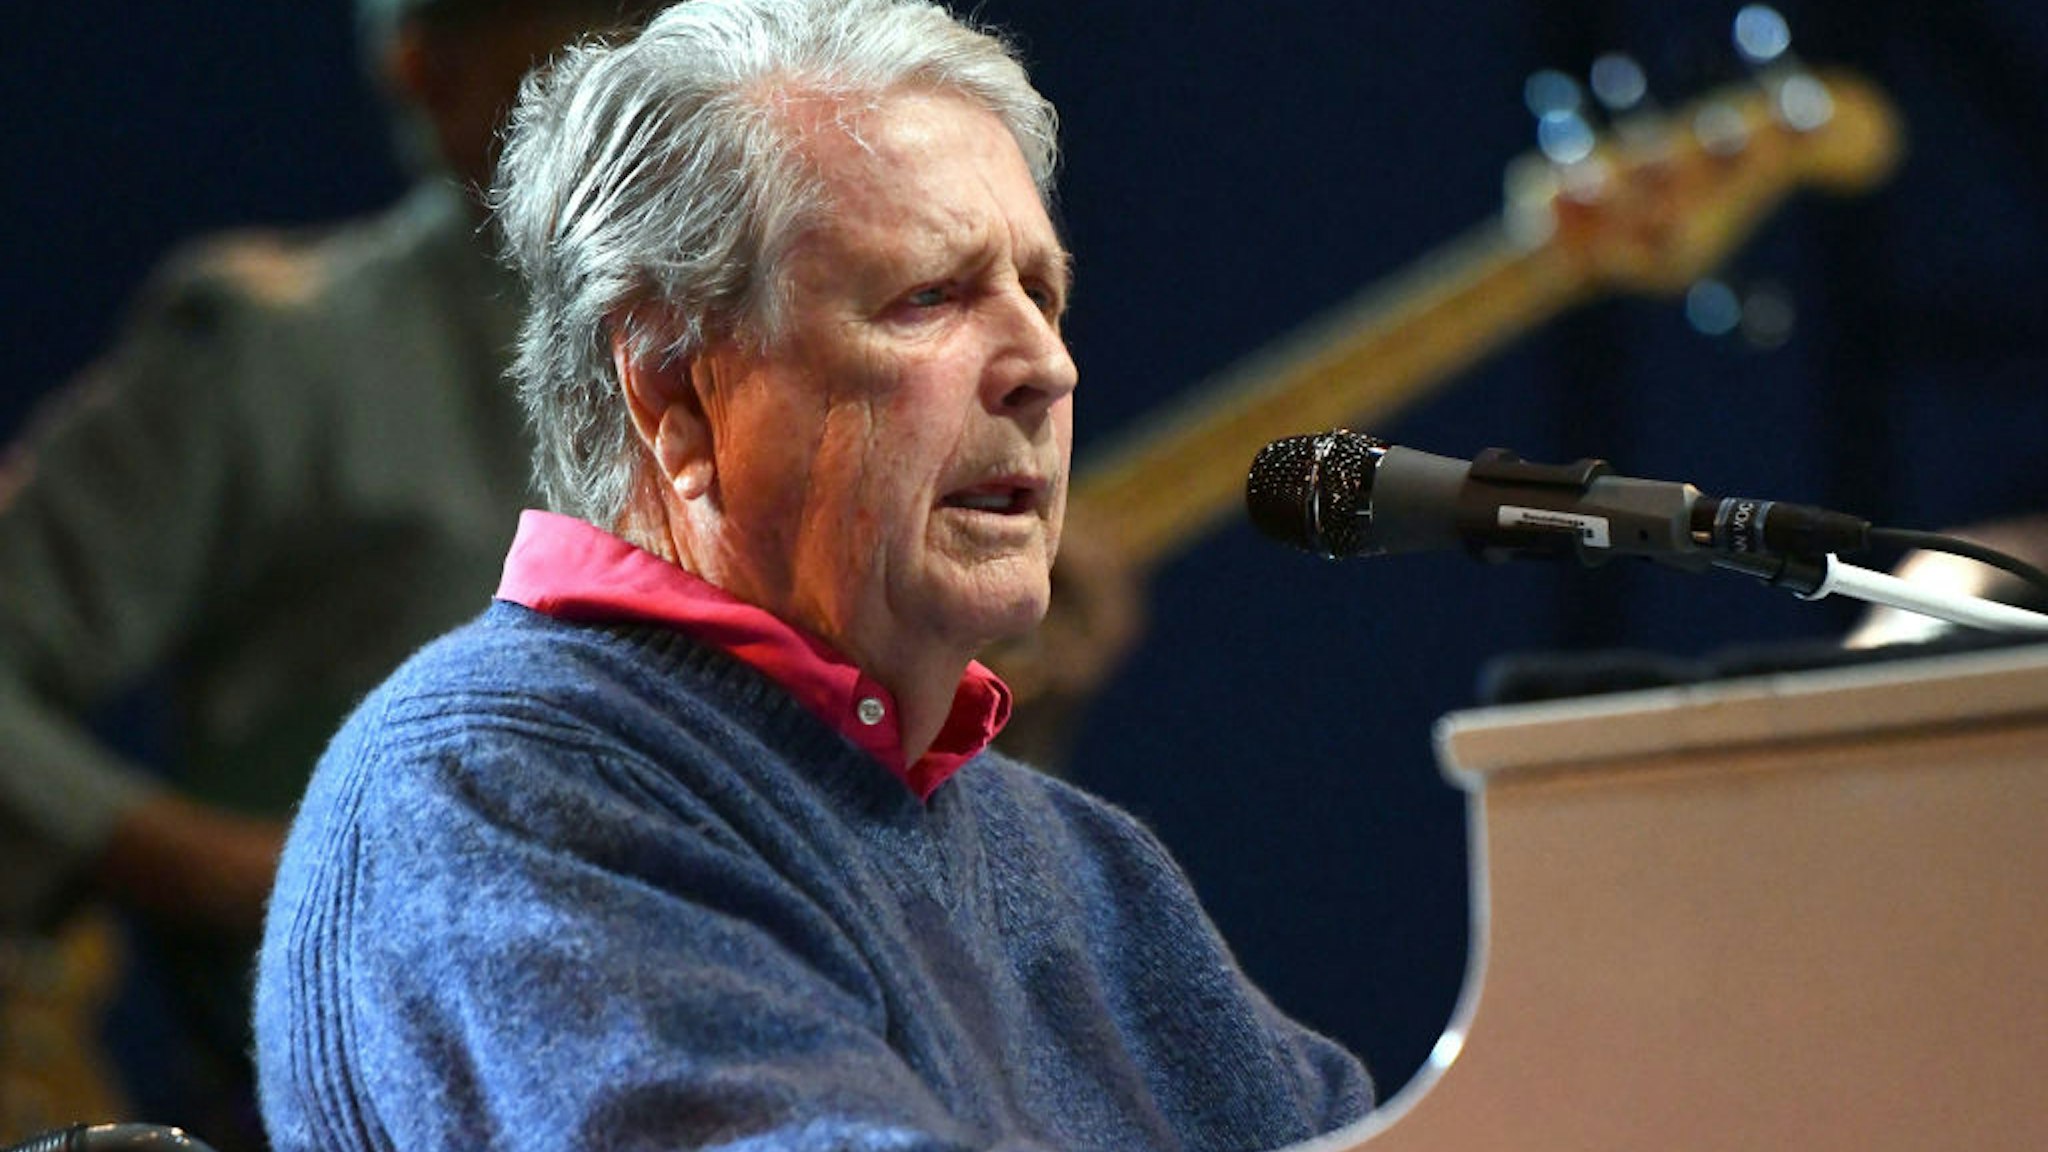 Rock and Roll Hall of Fame inductee Brian Wilson, founding member of The Beach Boys, performs onstage during Day 2 of the BeachLife Festival at Redondo Beach on May 03, 2019 in Redondo Beach, California.